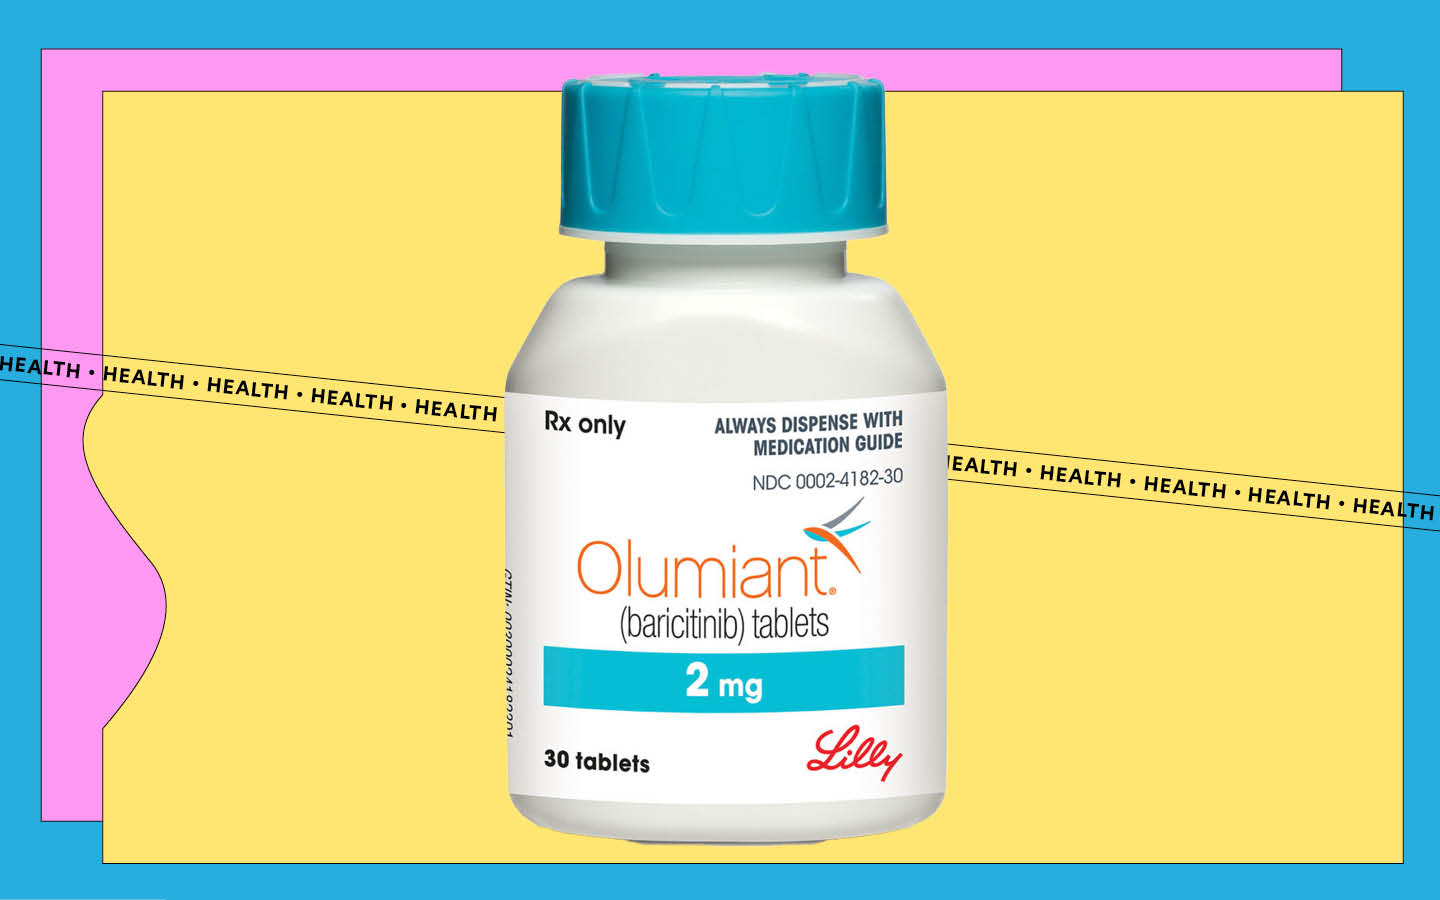 Eli Lilly and Incyte Olumiant alopecia medicine in bottle